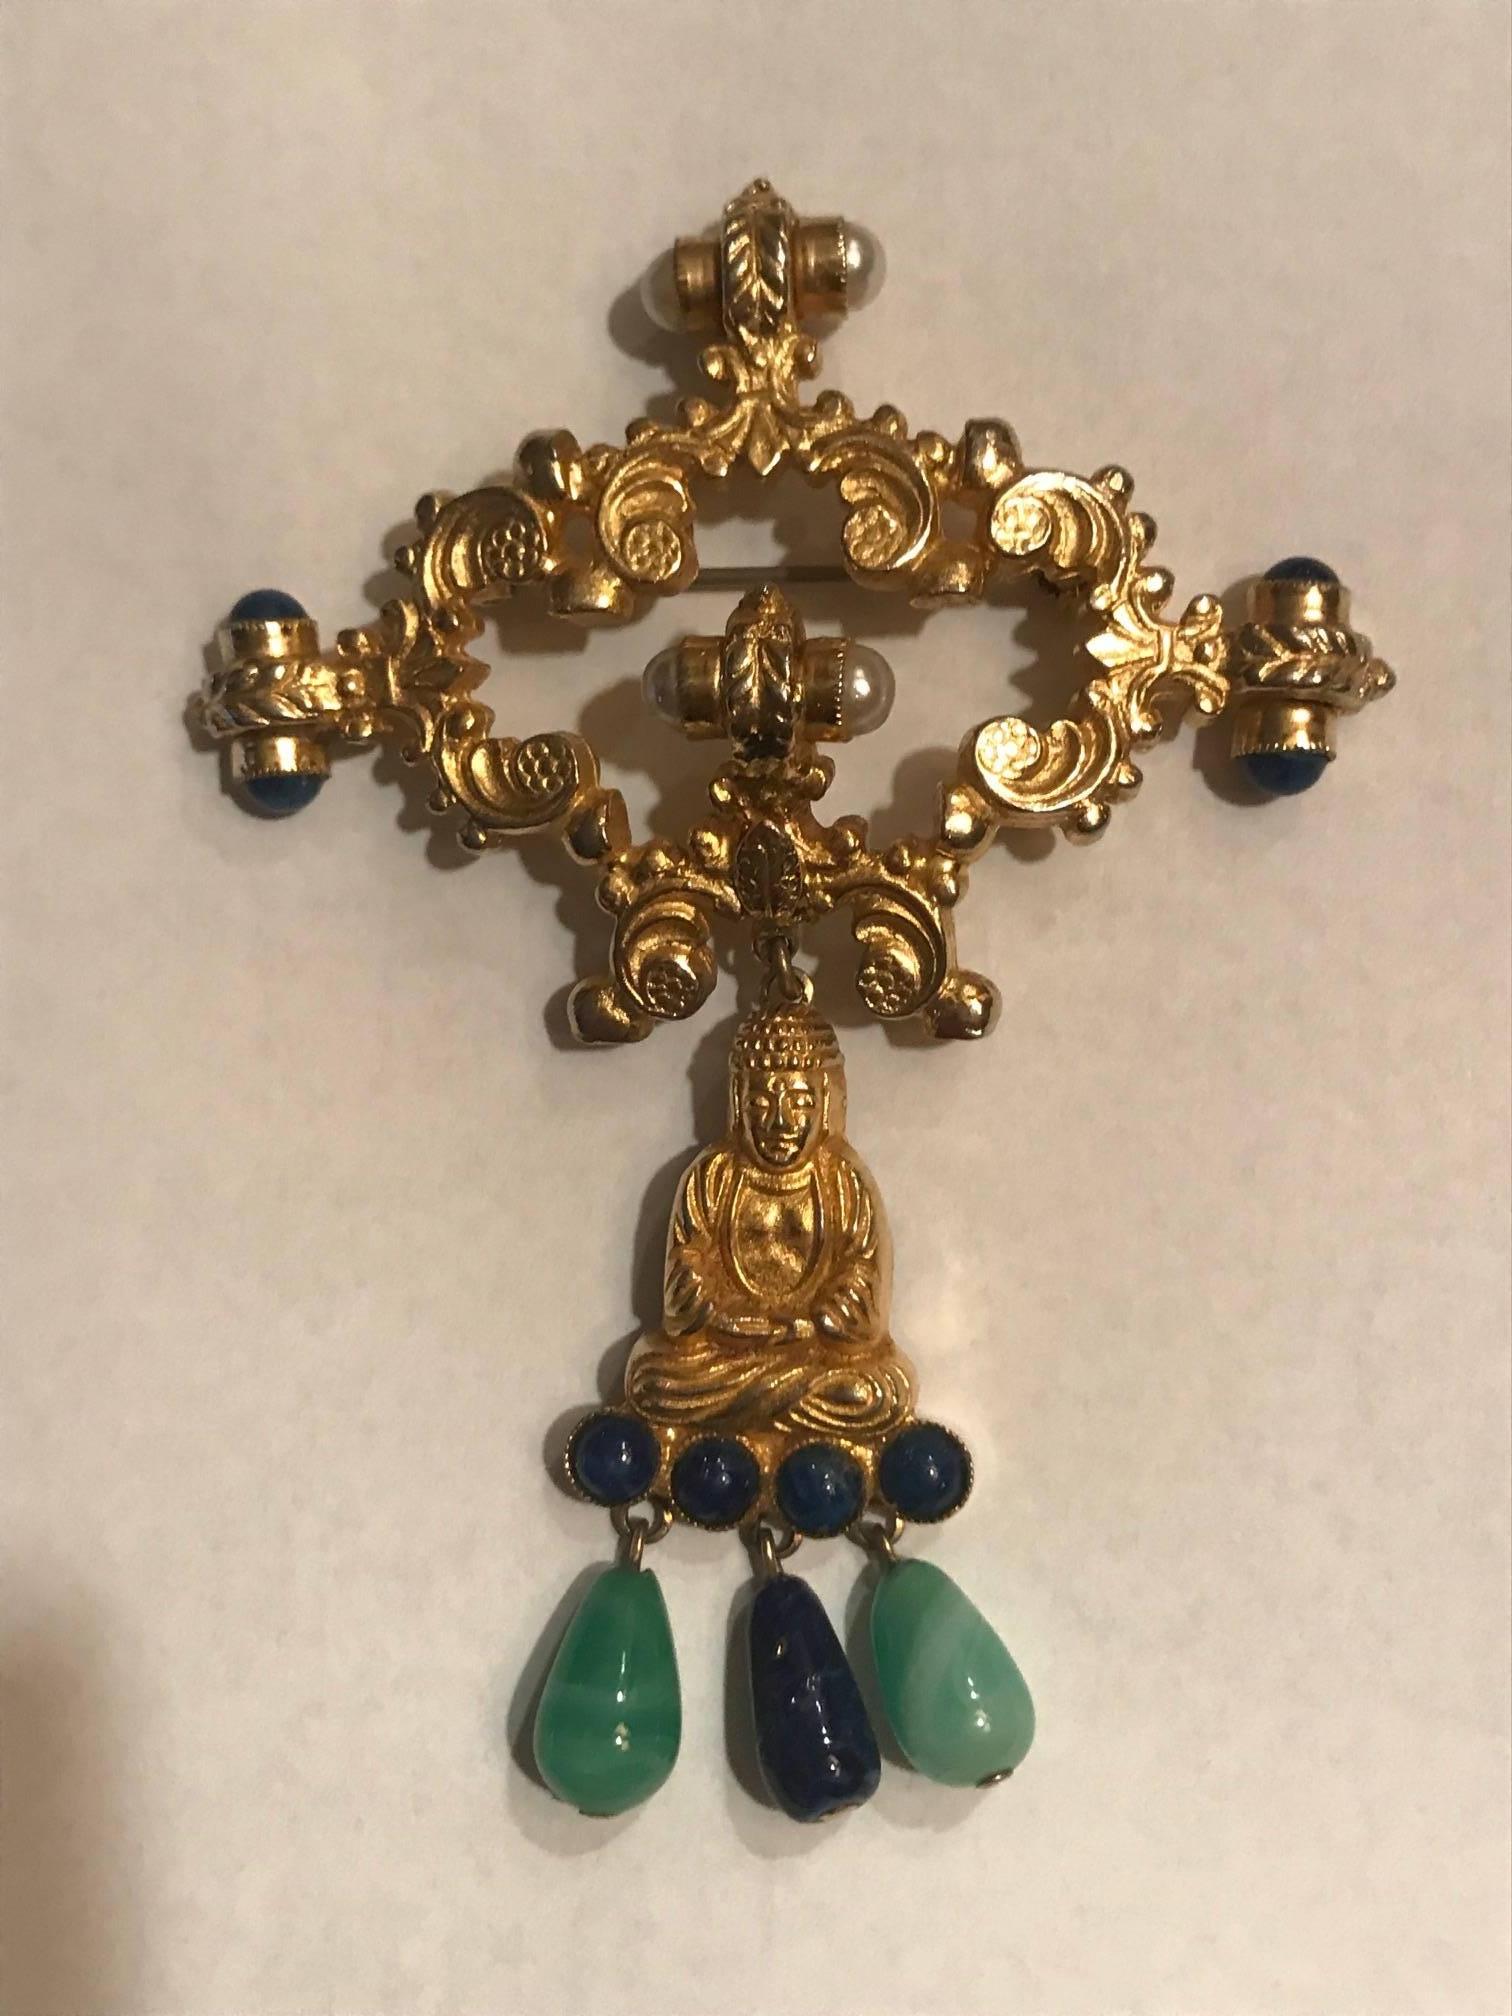 William de Lillo vintage 1960s (1968) gold tone Buddha pin and earclips. Accented with faux pearl, jade, and lapis. 

Stamped WM de Lillo at back of one earring and at back of brooch.

Pin fastening on brooch, clip fastening on earrings.

Brooch